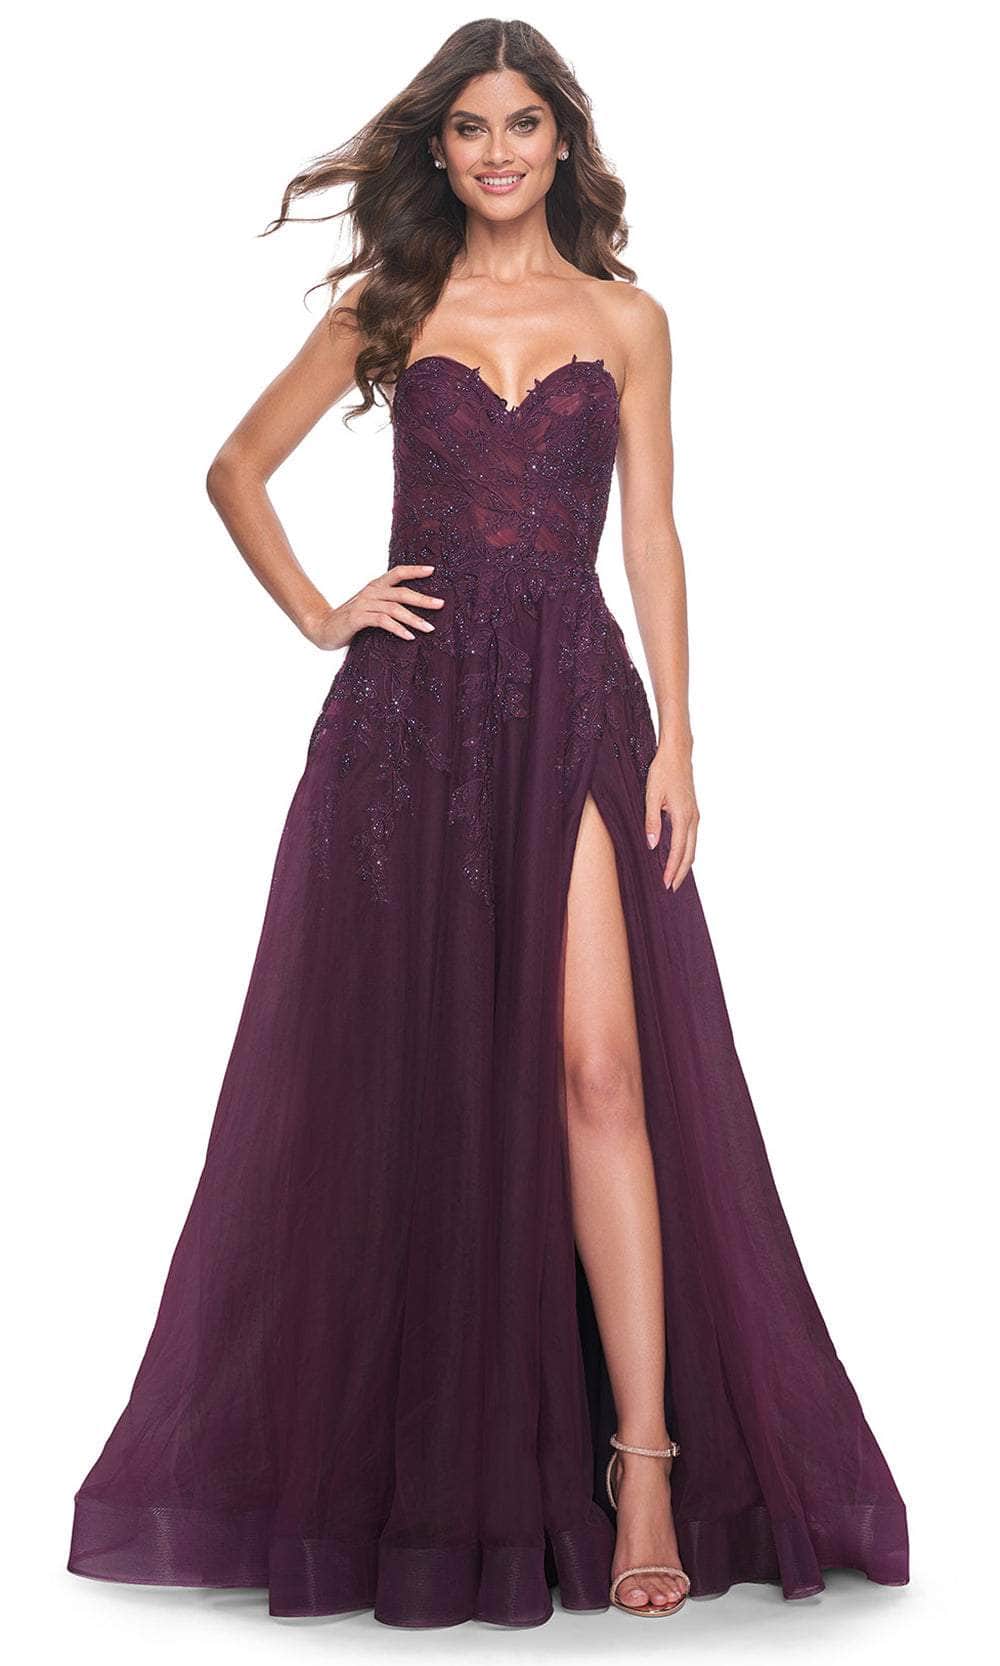 Image of La Femme 32304 - Sweetheart Tulle A-Line Prom Gown